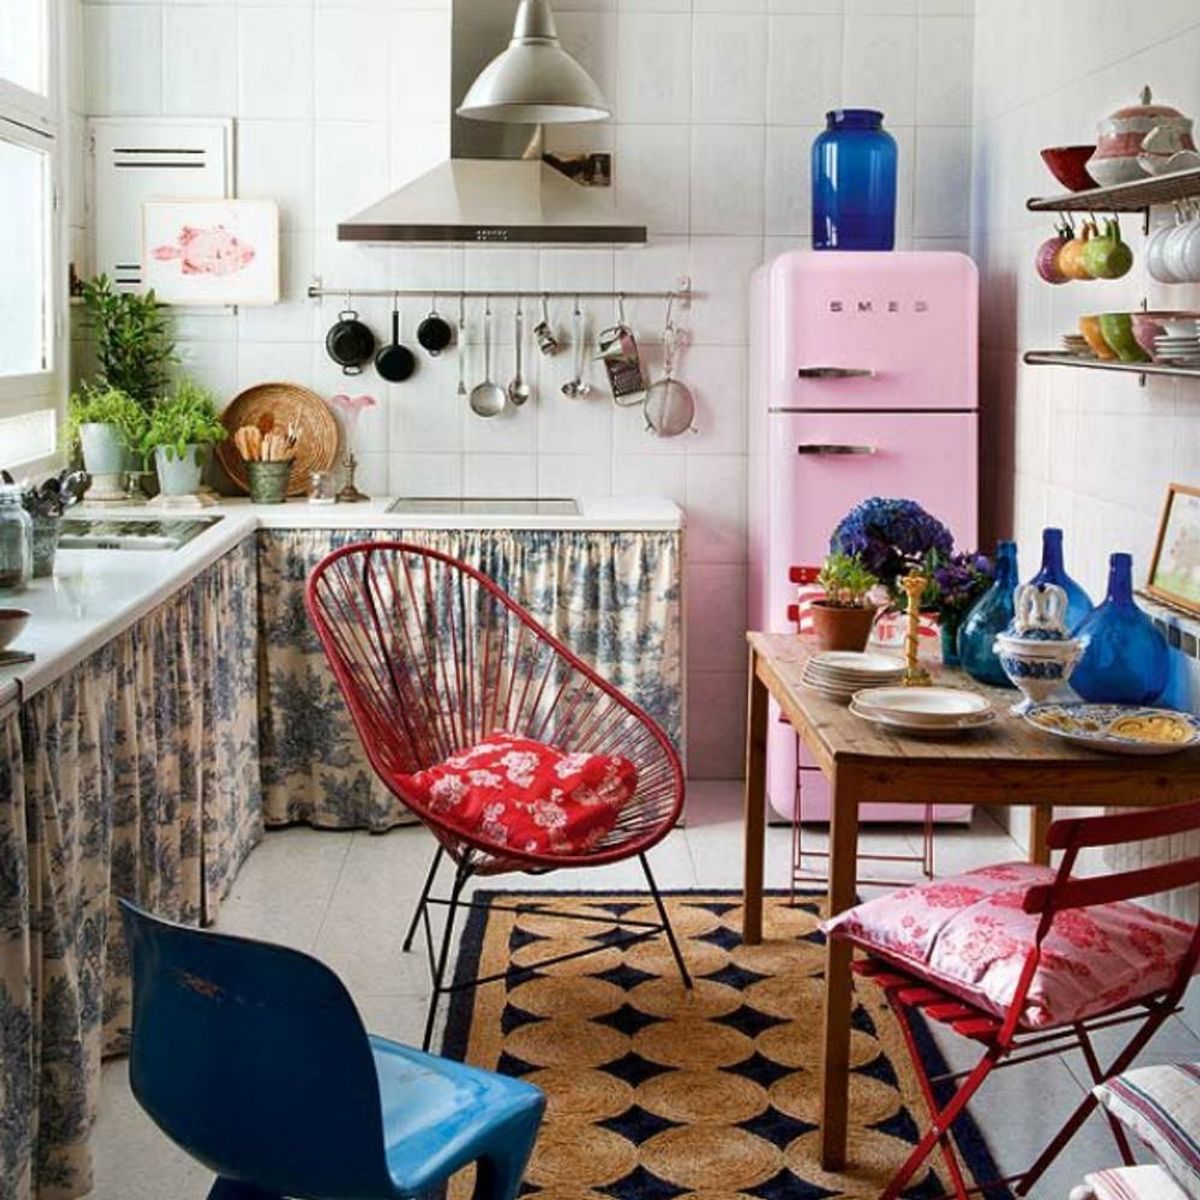 15 Times Acapulco Chairs Proved They’re Stunning in Every Room